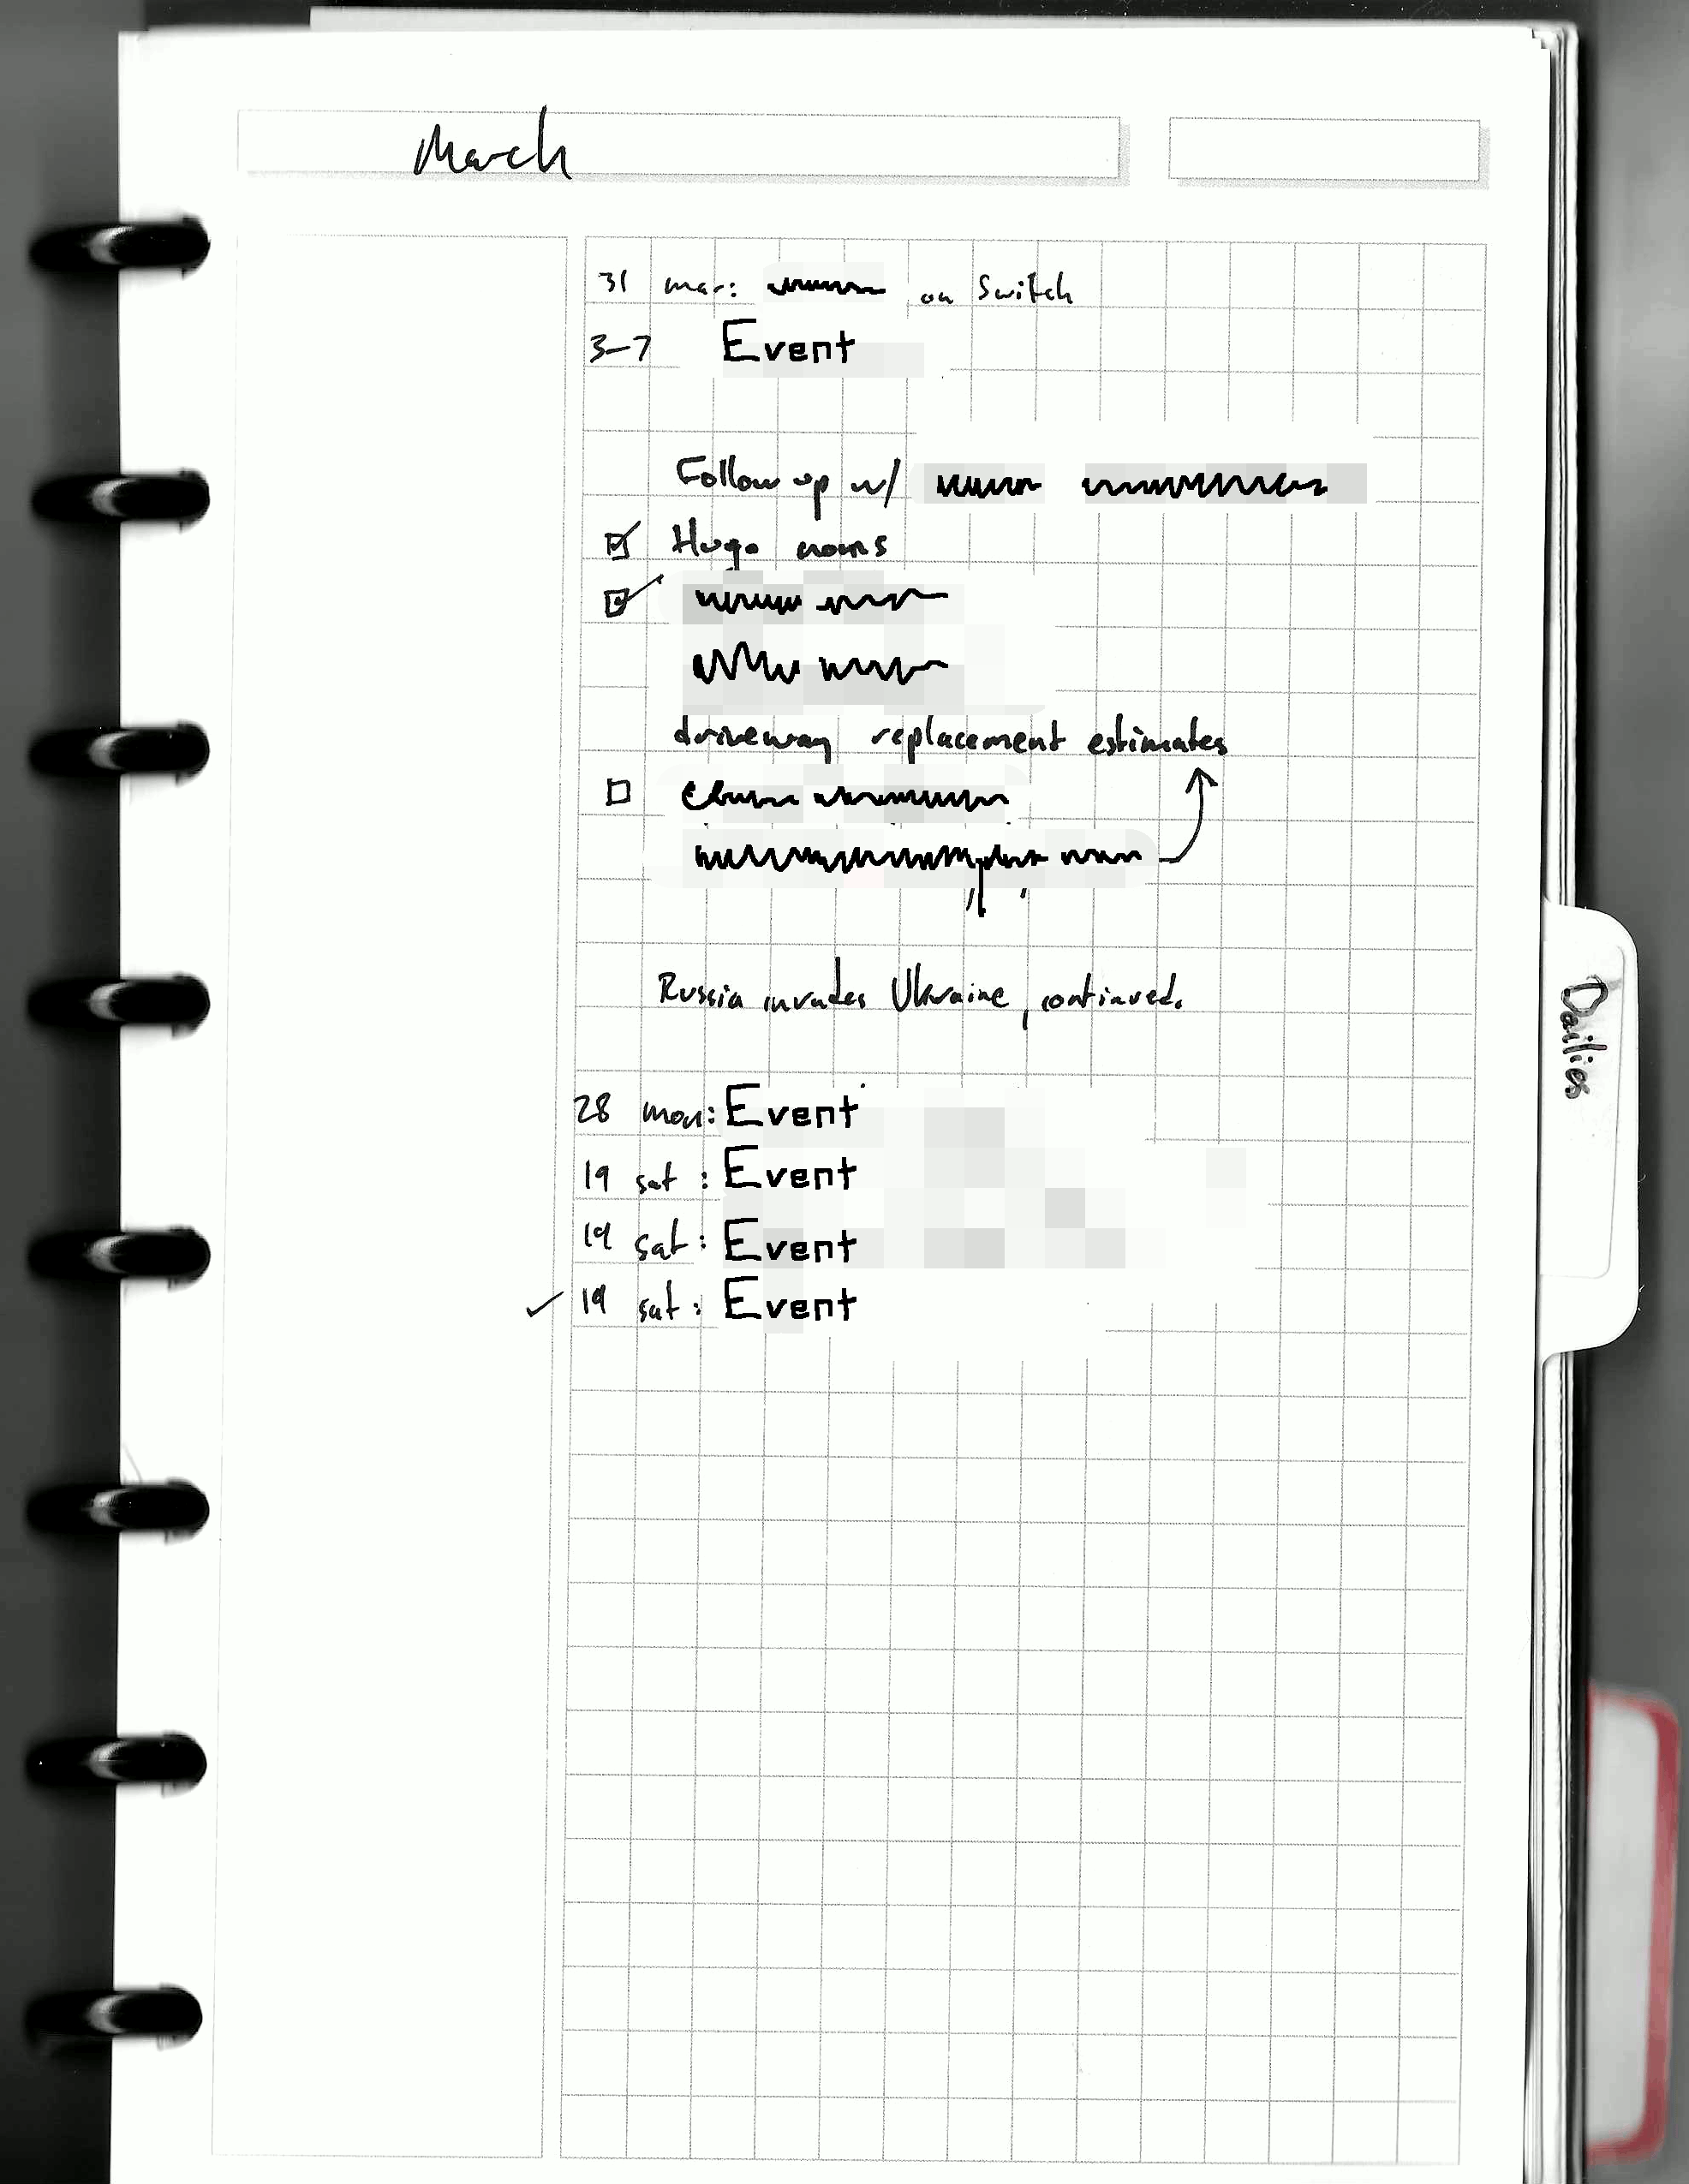 A month page is basically just a list of tasks, some of which have dates and some of which have checkboxes.